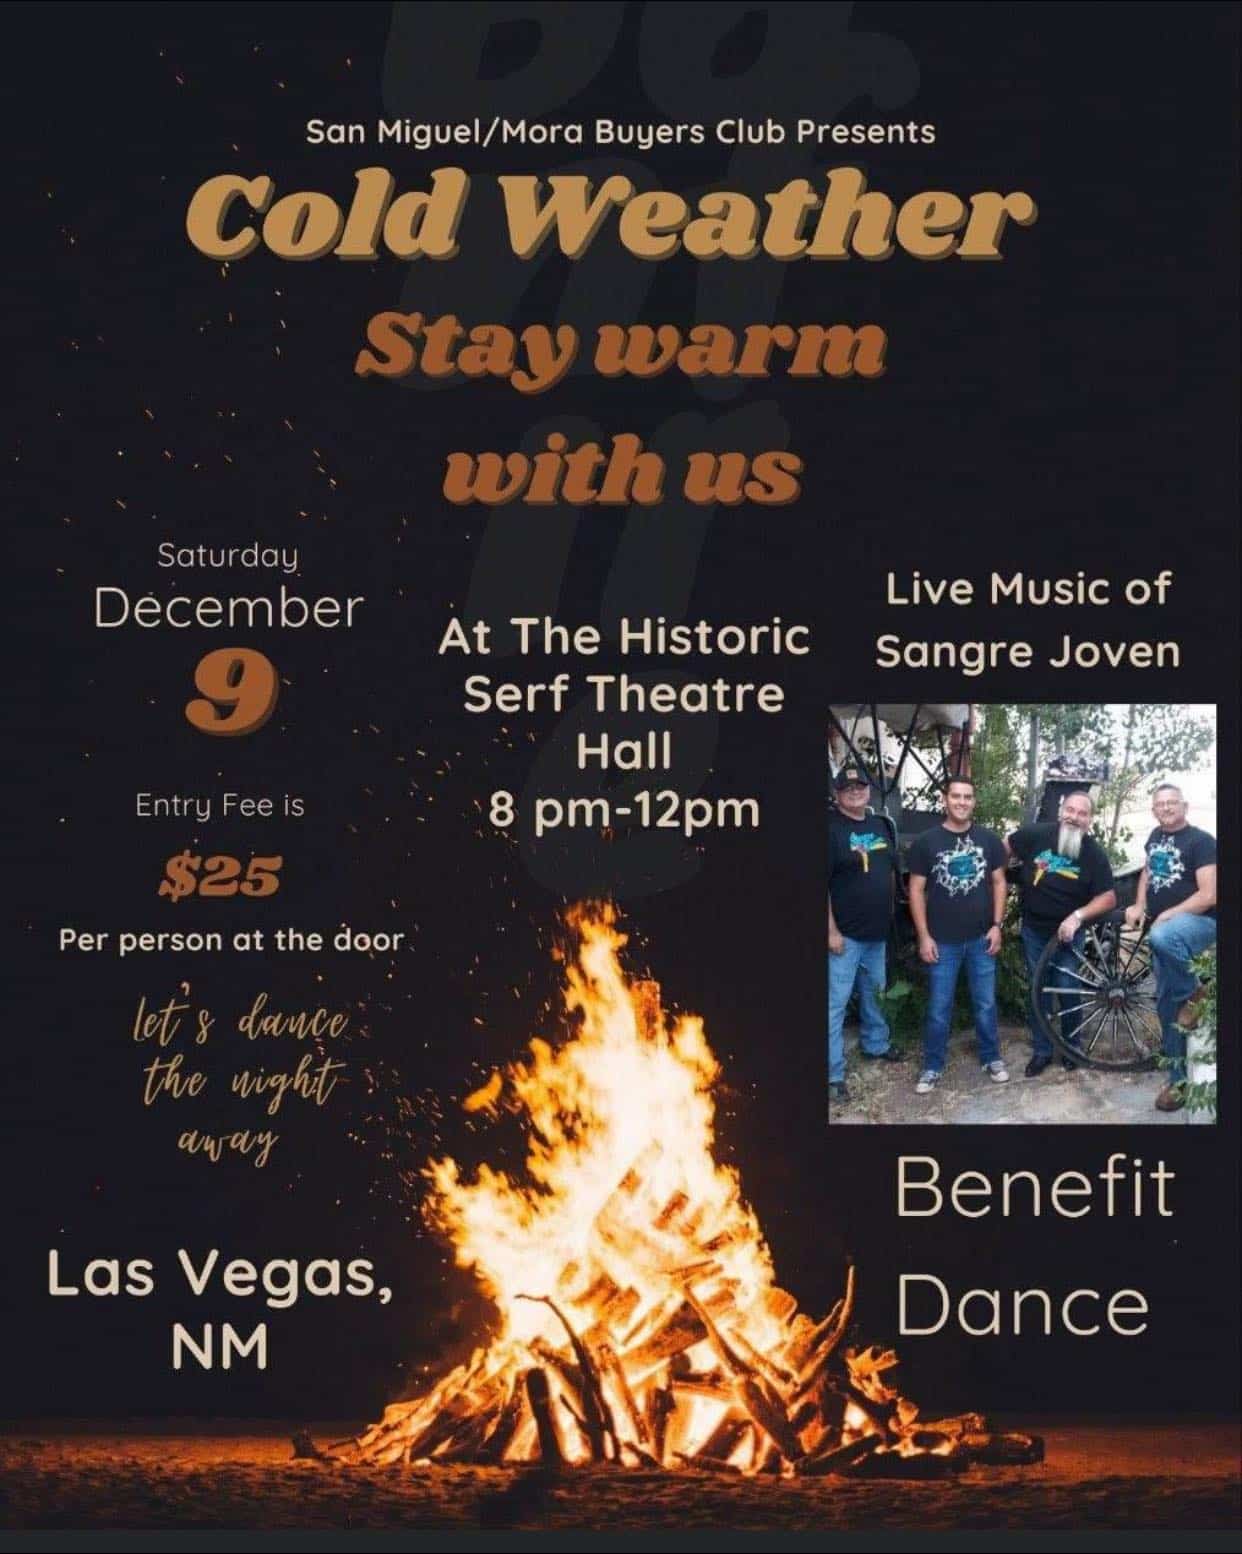 Cold weather benefit dance at the Serf Theater